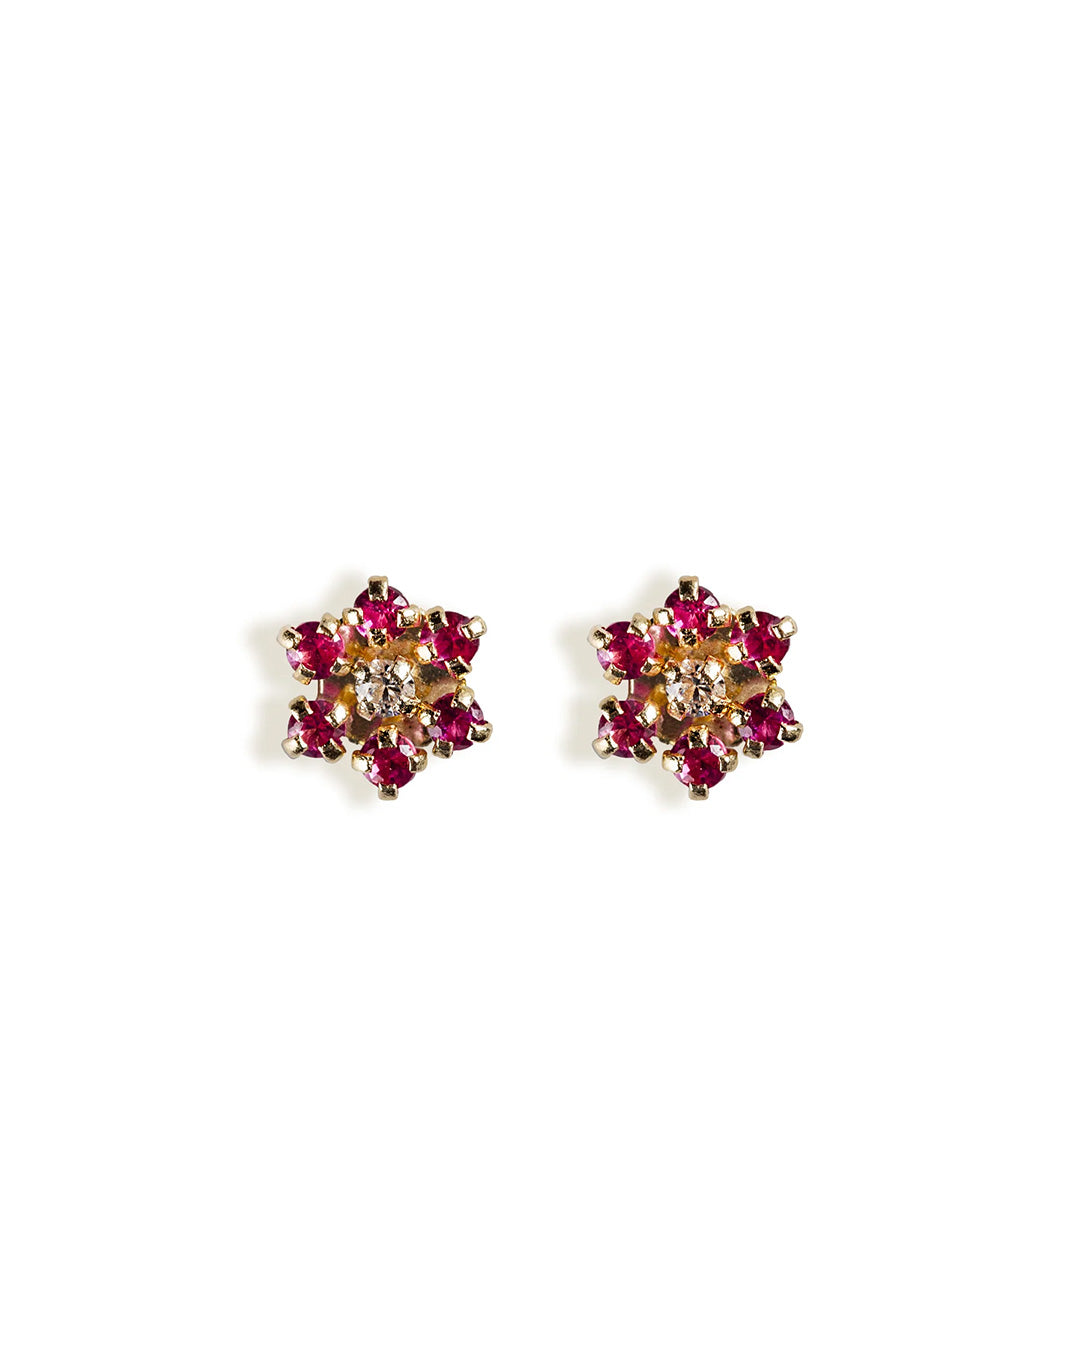 14K FLOWER EARRINGS WITH FUCHSIA CRYSTALS